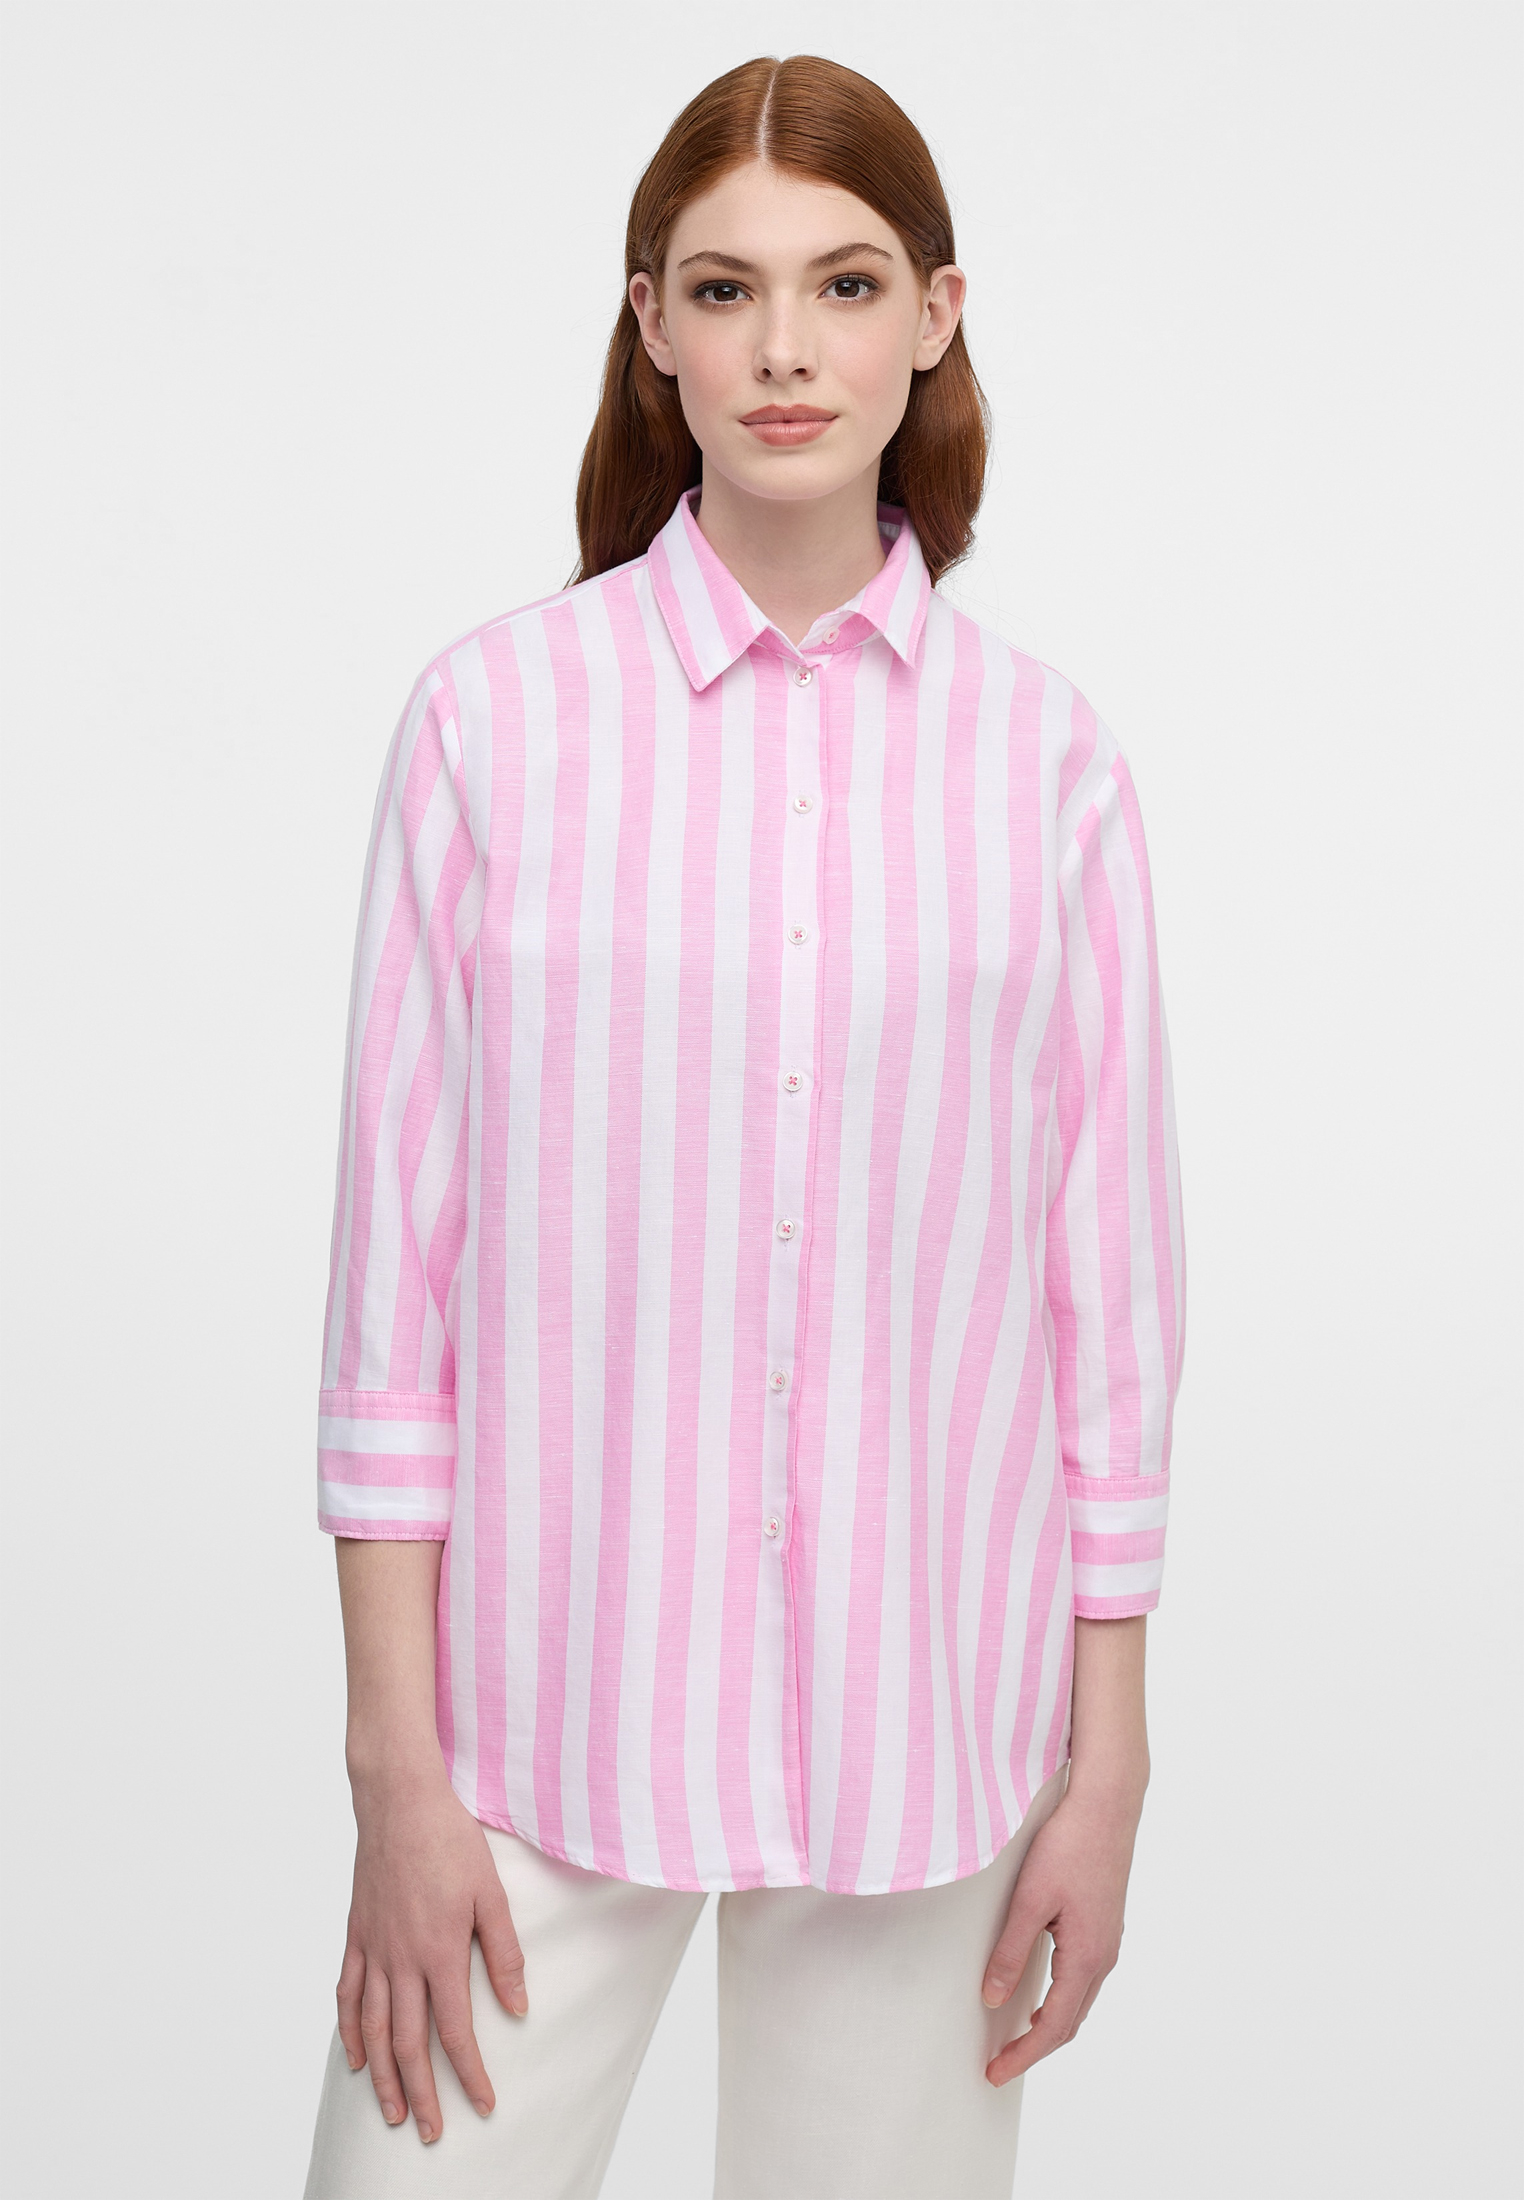 shirt-blouse in rose striped | rose | 36 | 3/4 sleeves |  2BL03967-15-11-36-3/4